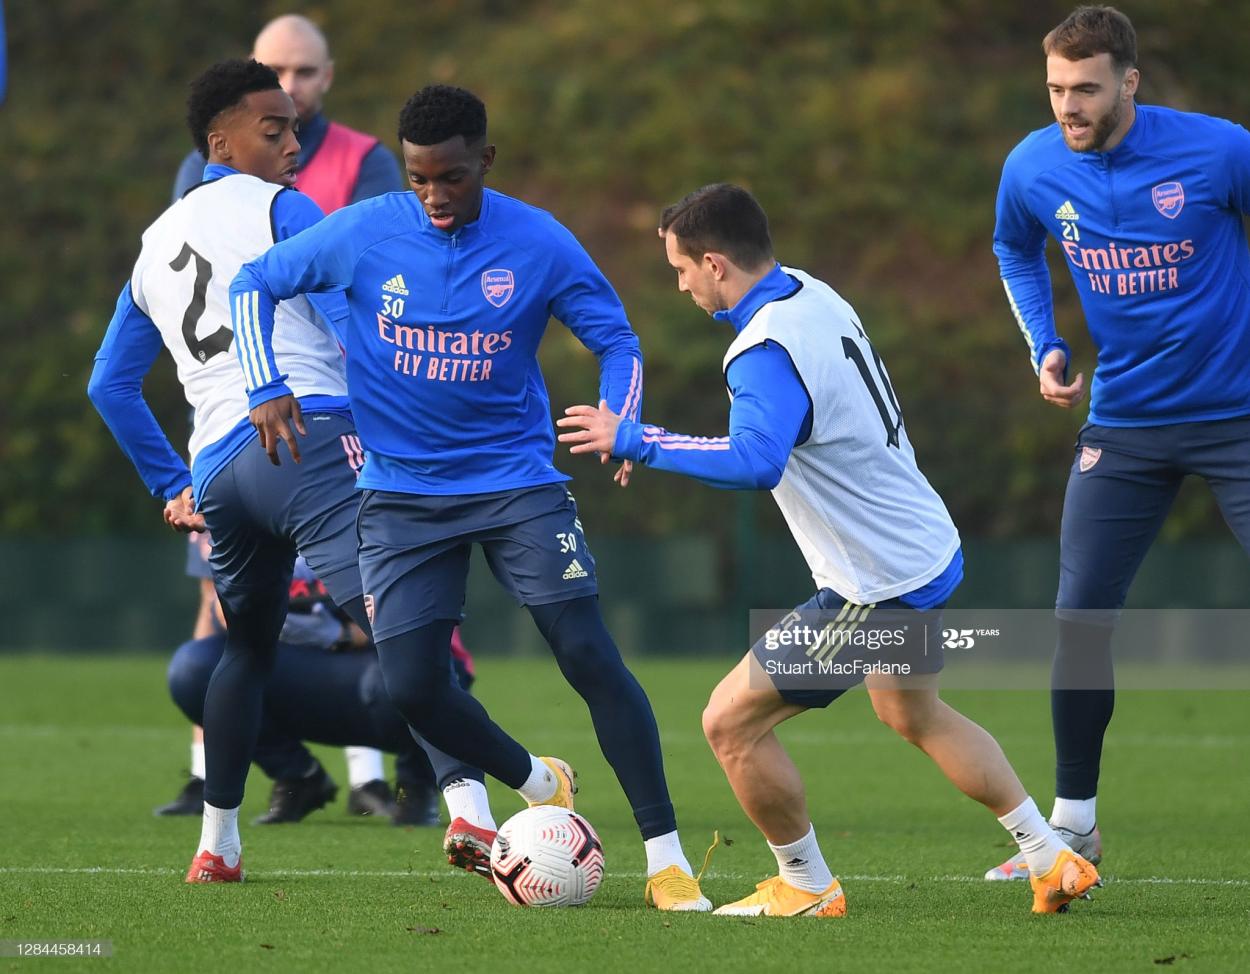 Eddie N'ketiah will be looking to force his way into the Premier League side (Photo by Stuart MacFarlane via Getty Images)